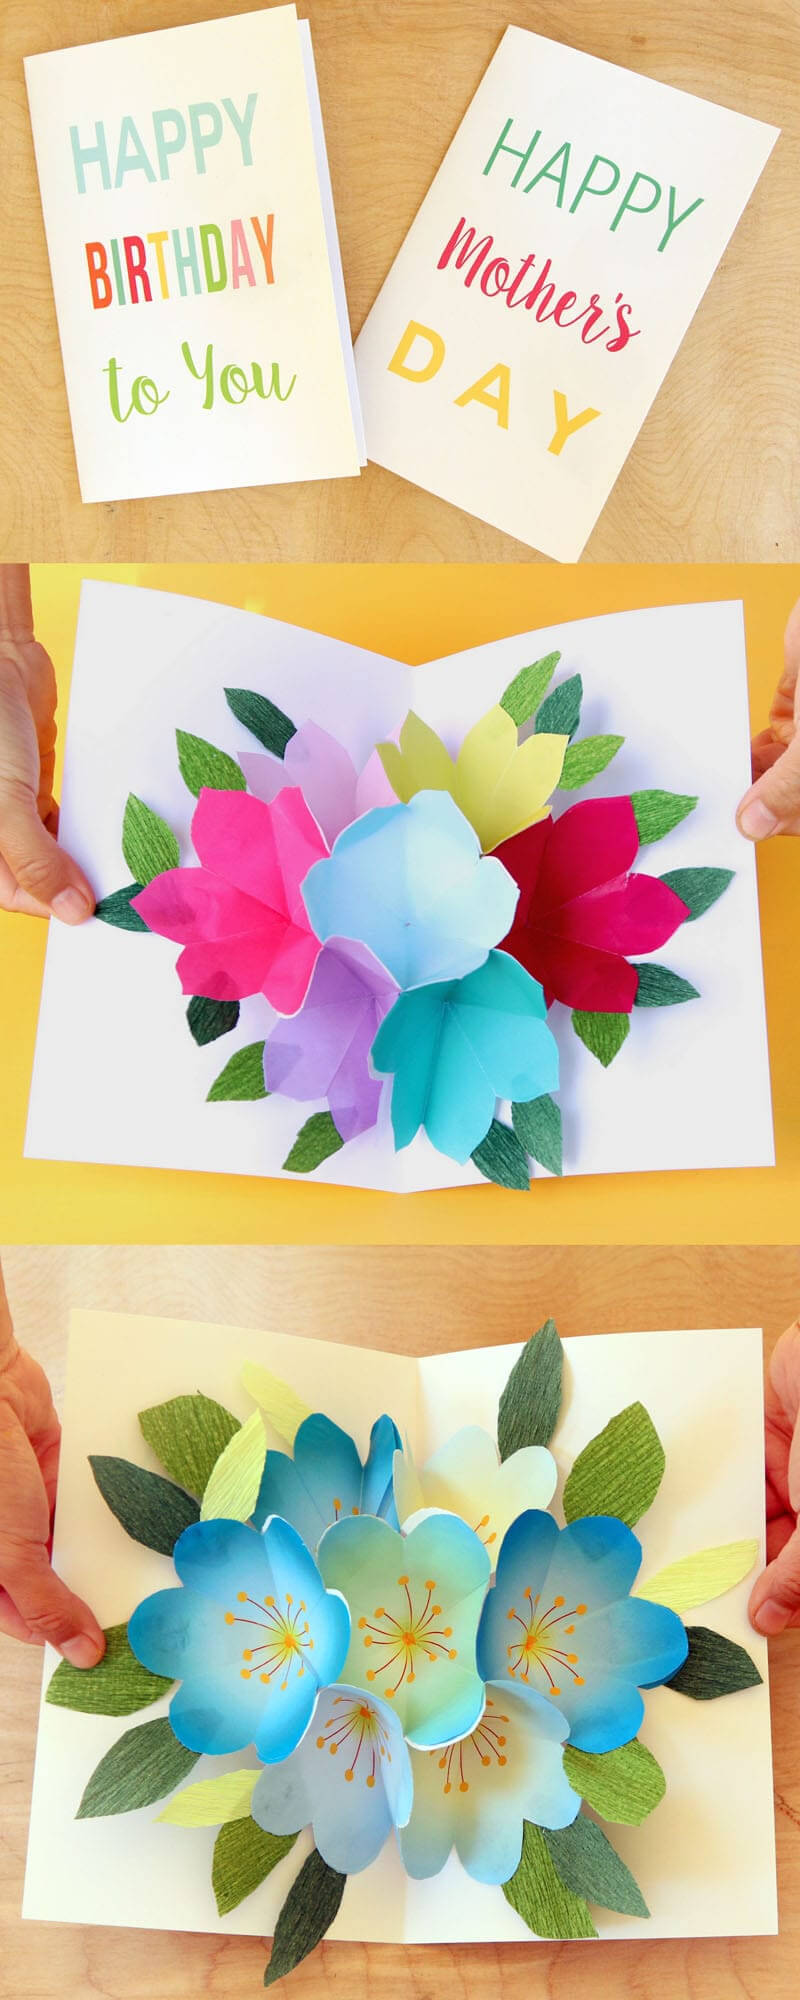 Free Printable Happy Birthday Card With Pop Up Bouquet – A Throughout Pop Up Card Templates Free Printable